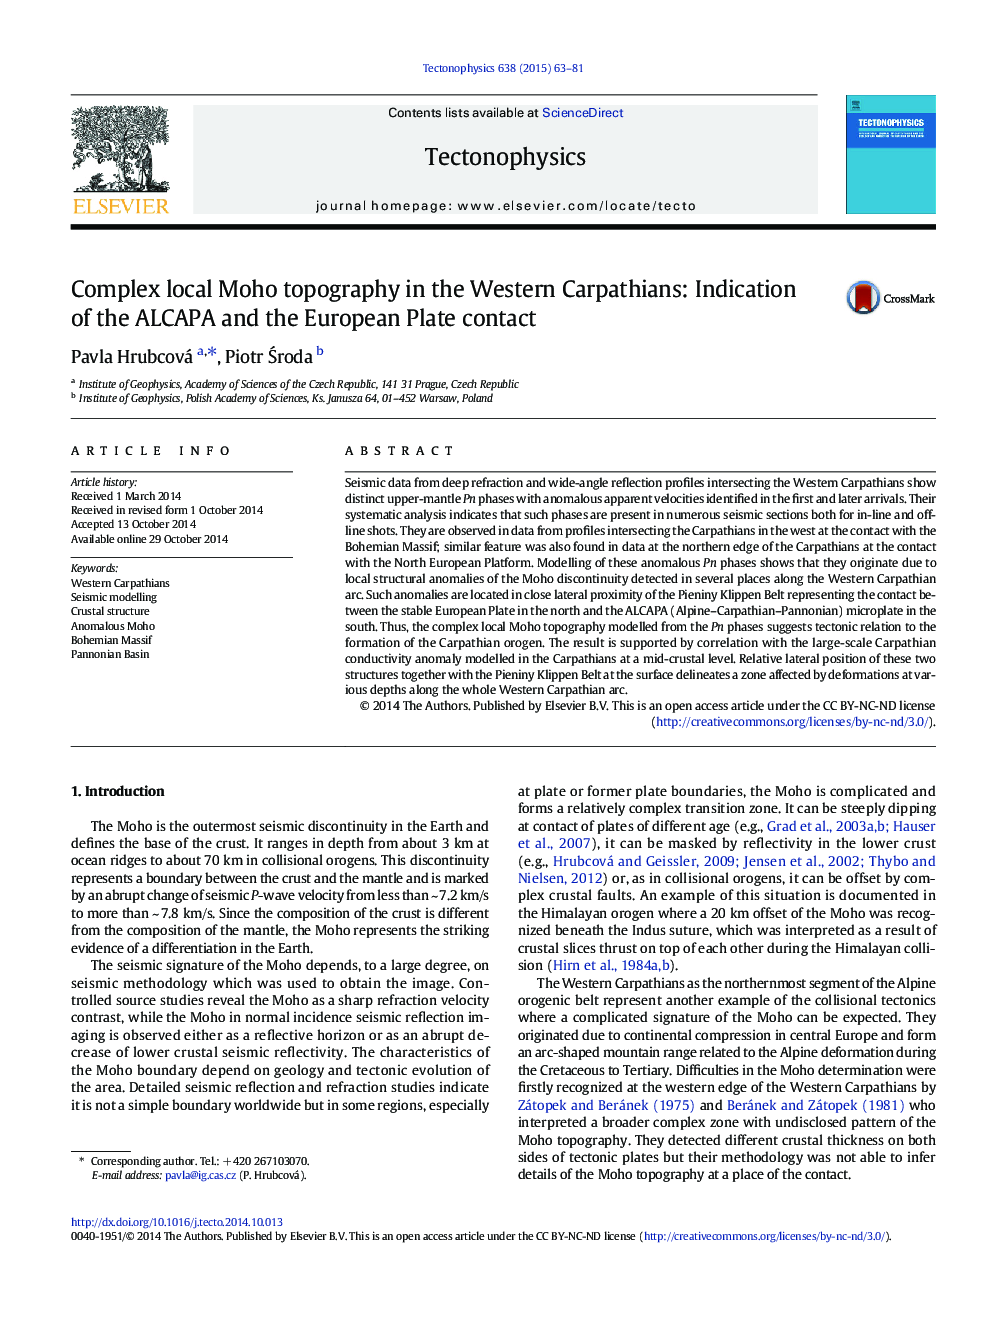 Complex local Moho topography in the Western Carpathians: Indication of the ALCAPA and the European Plate contact